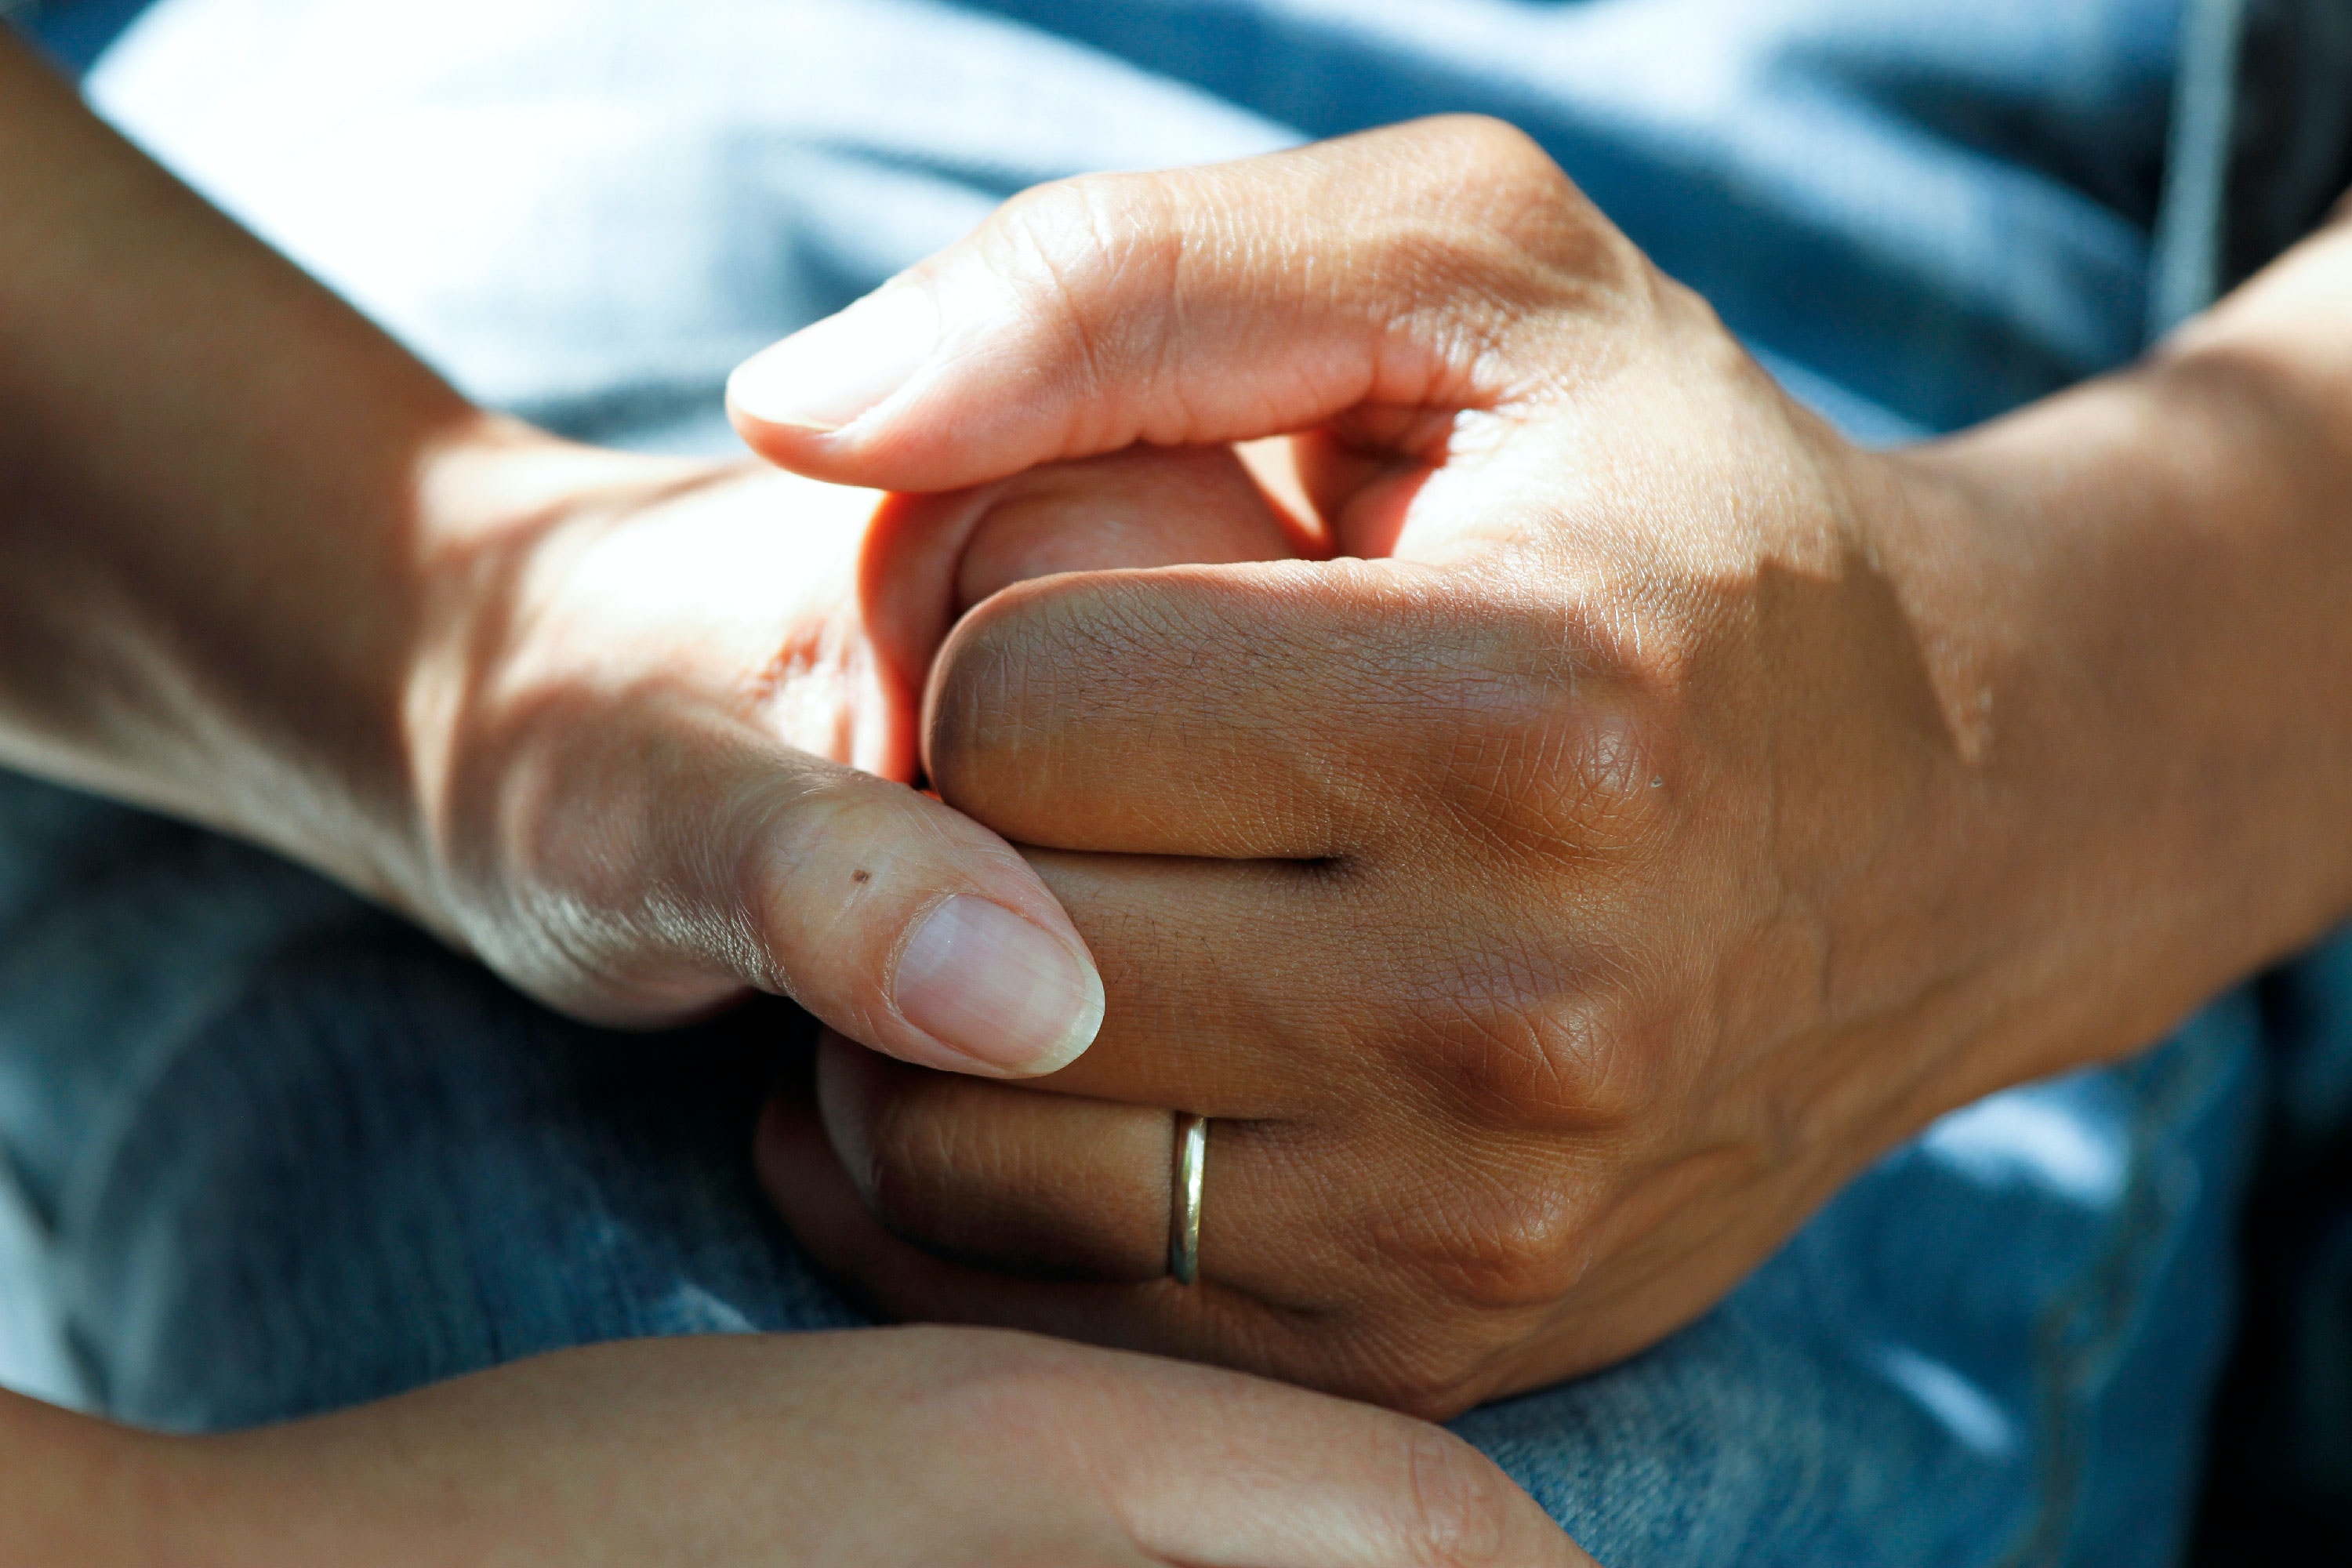 Holding hands can reduce anxiety-related brain activity. Image: National Cancer Institute / Unsplash 